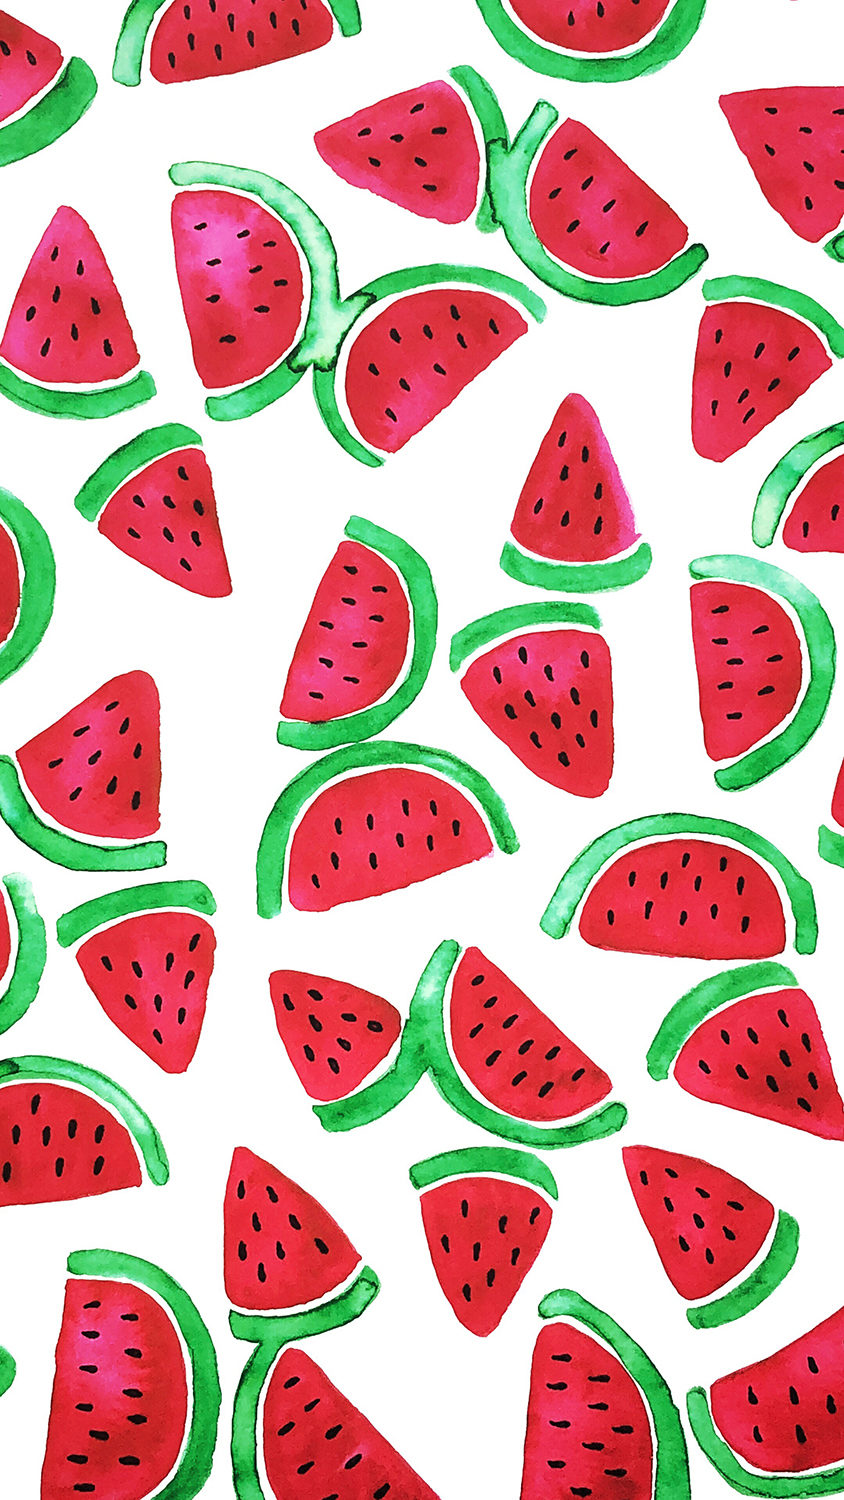 These delicious little watermelons make a nice phone background, so why not snap a photo and turn it into your wallpaper!